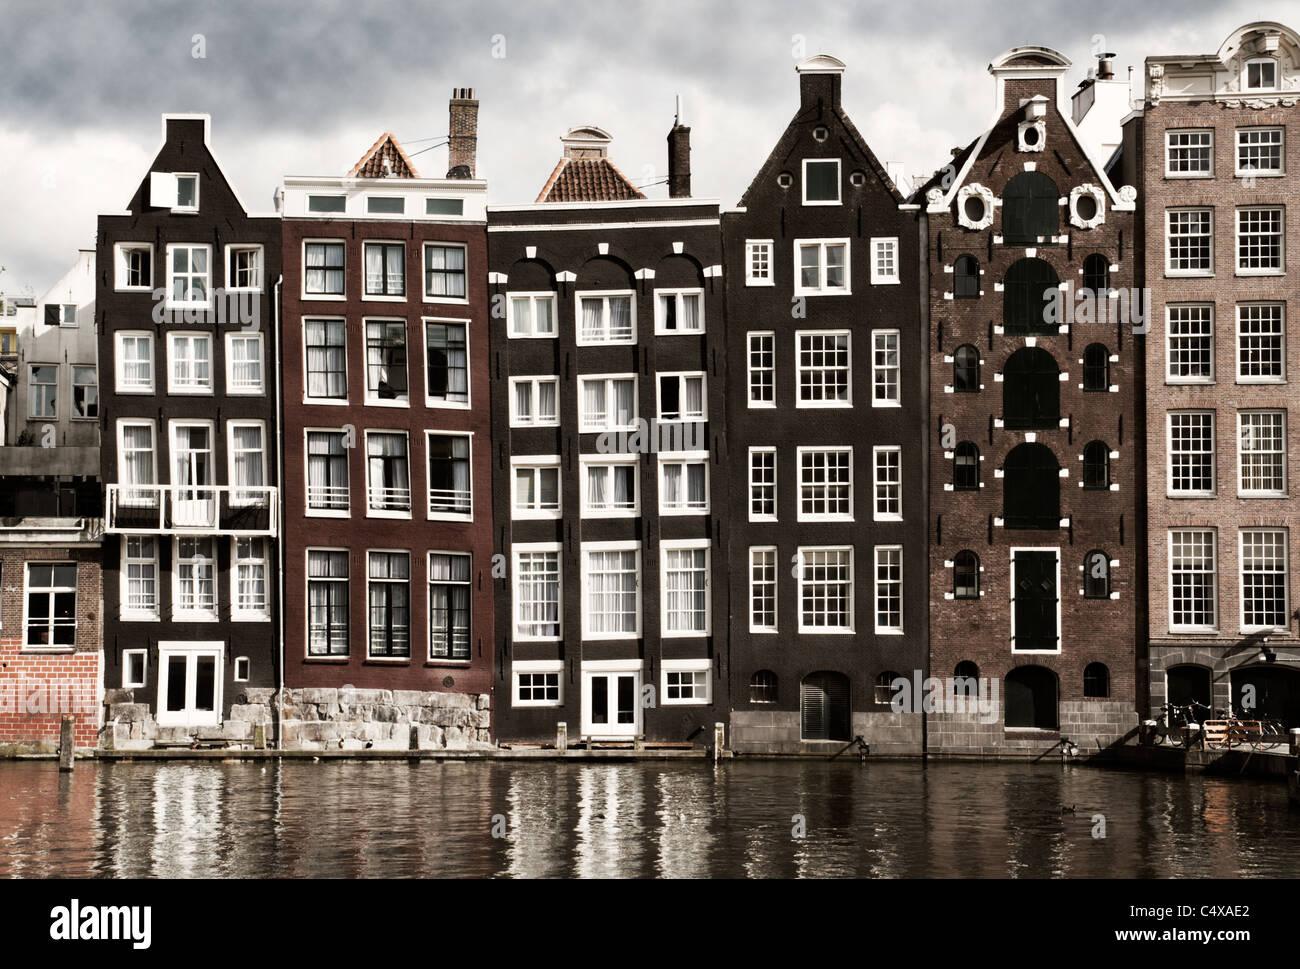 Amsterdam canal houses Stock Photo